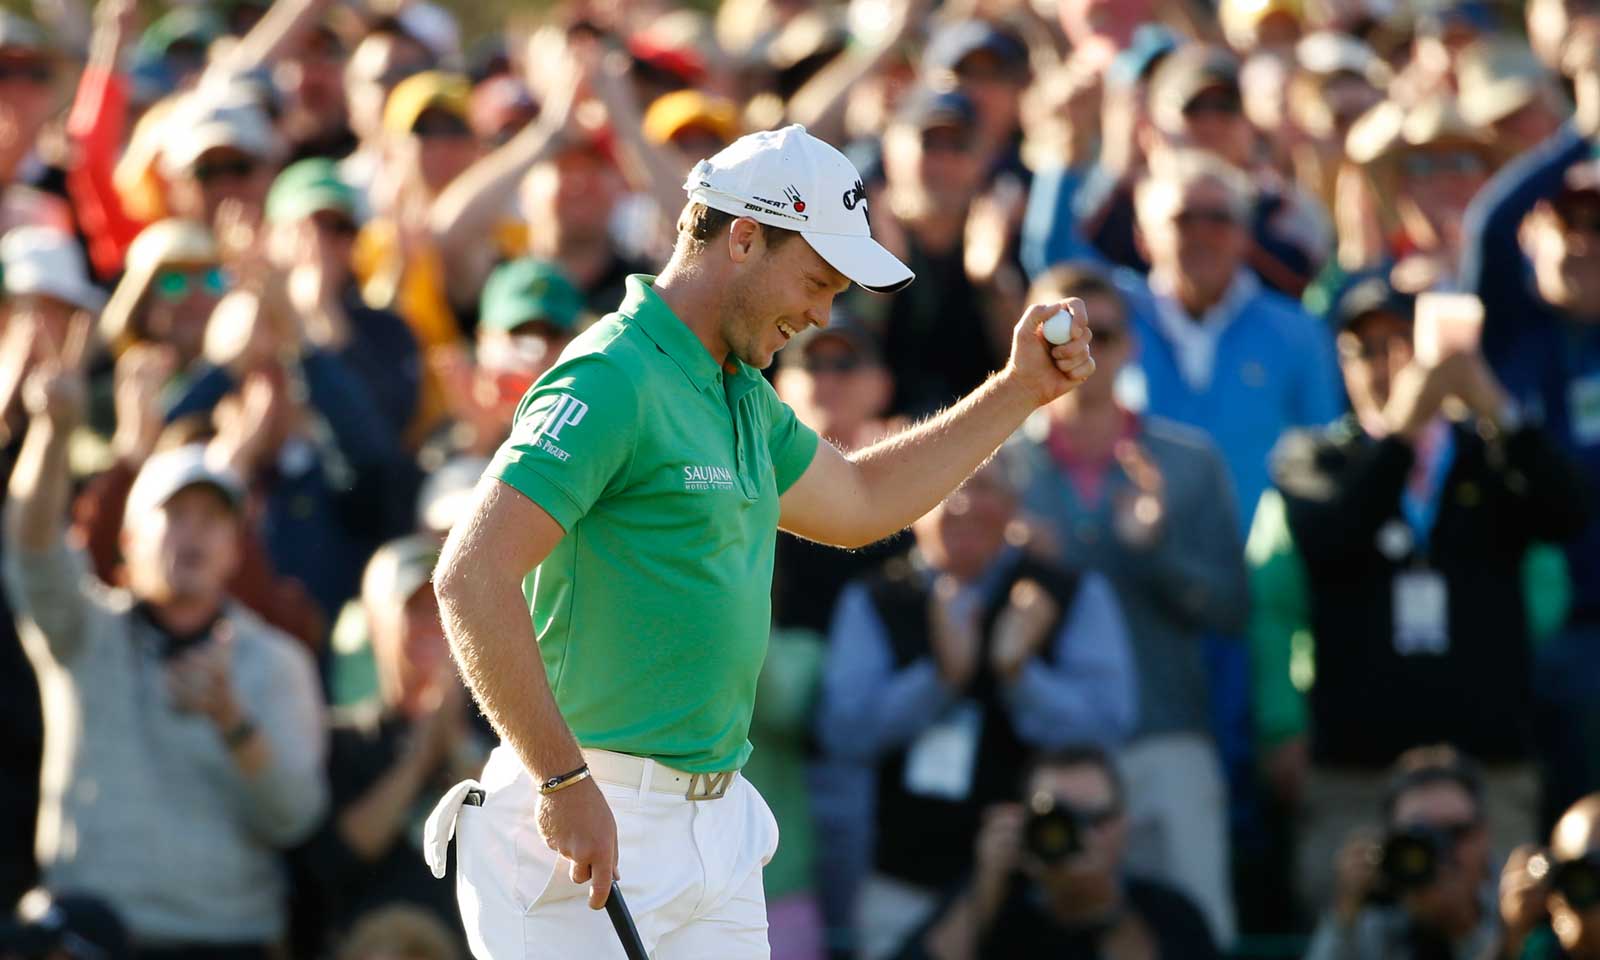 The-Greatest-Upsets-in-Augusta-Masters-History-Danny-Willett